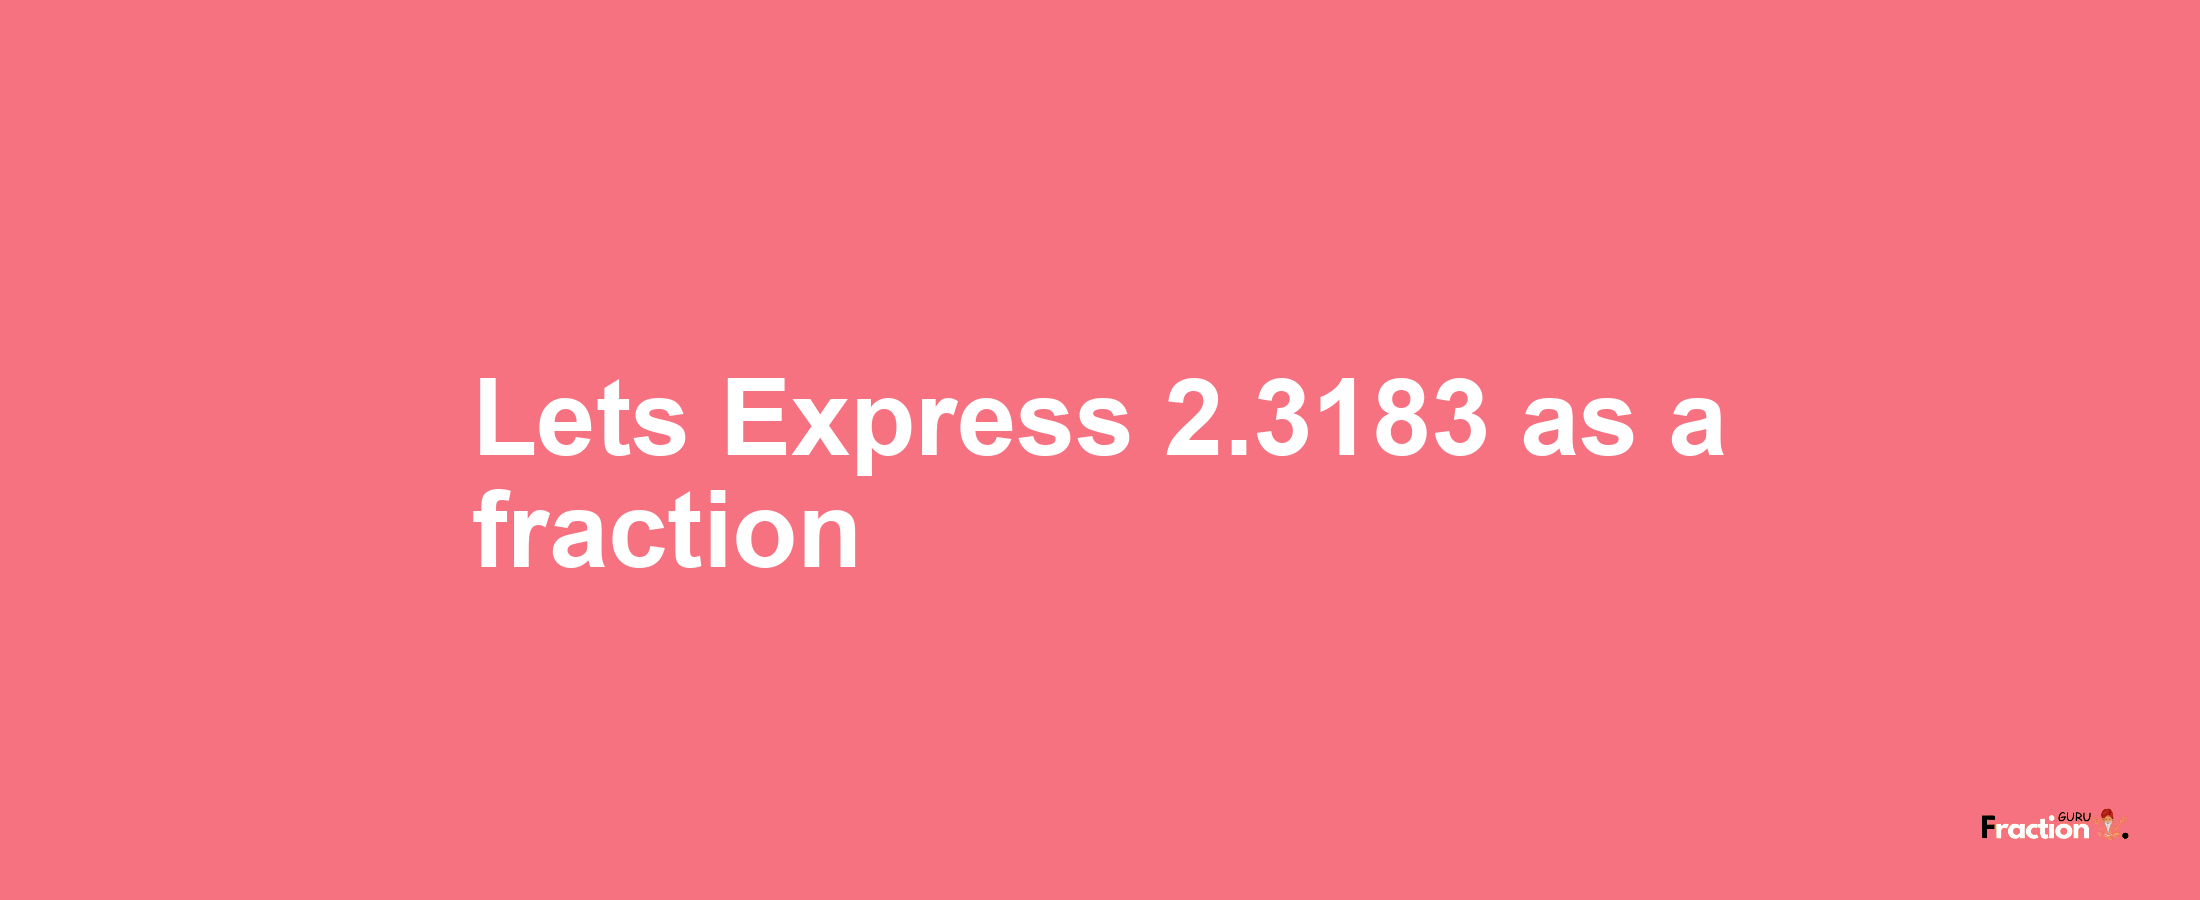 Lets Express 2.3183 as afraction